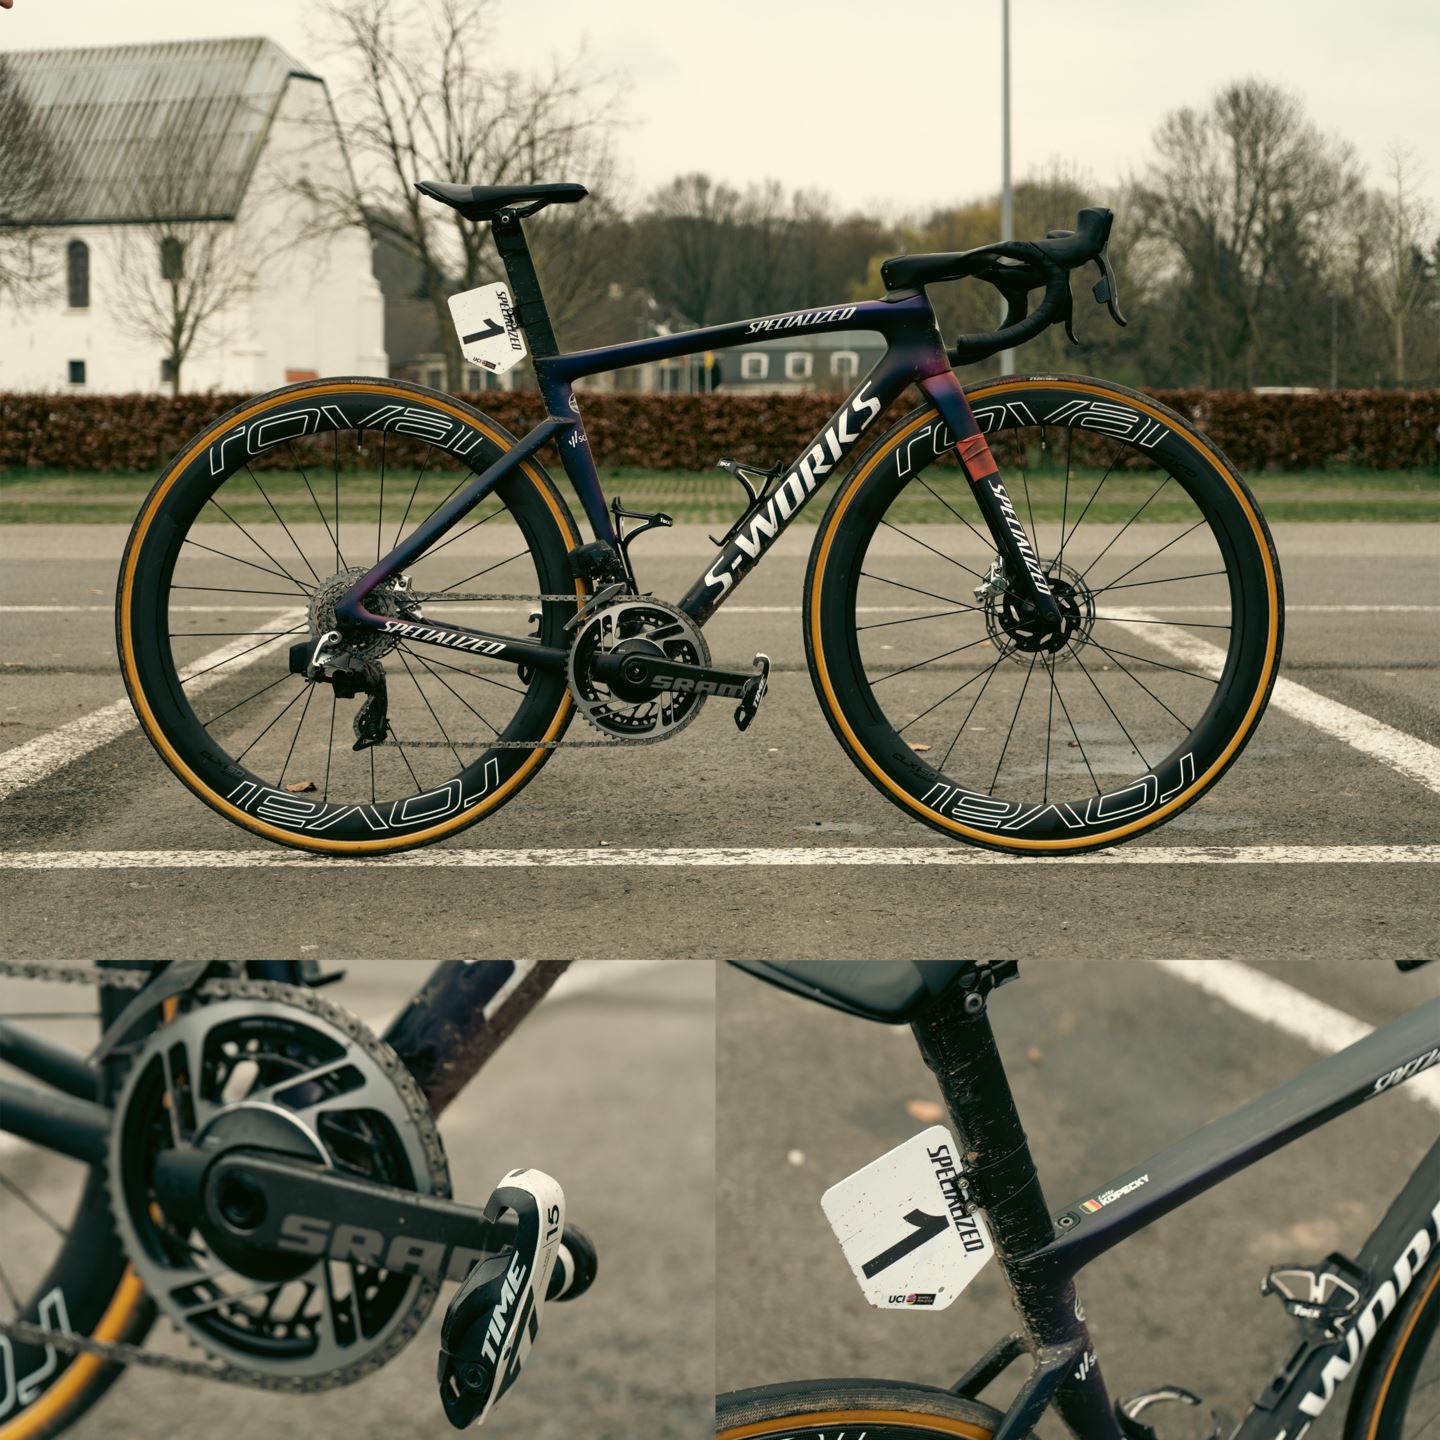 Lotte Kopecky's RED eTap AXS-equipped bike that won the Tour of Flanders.